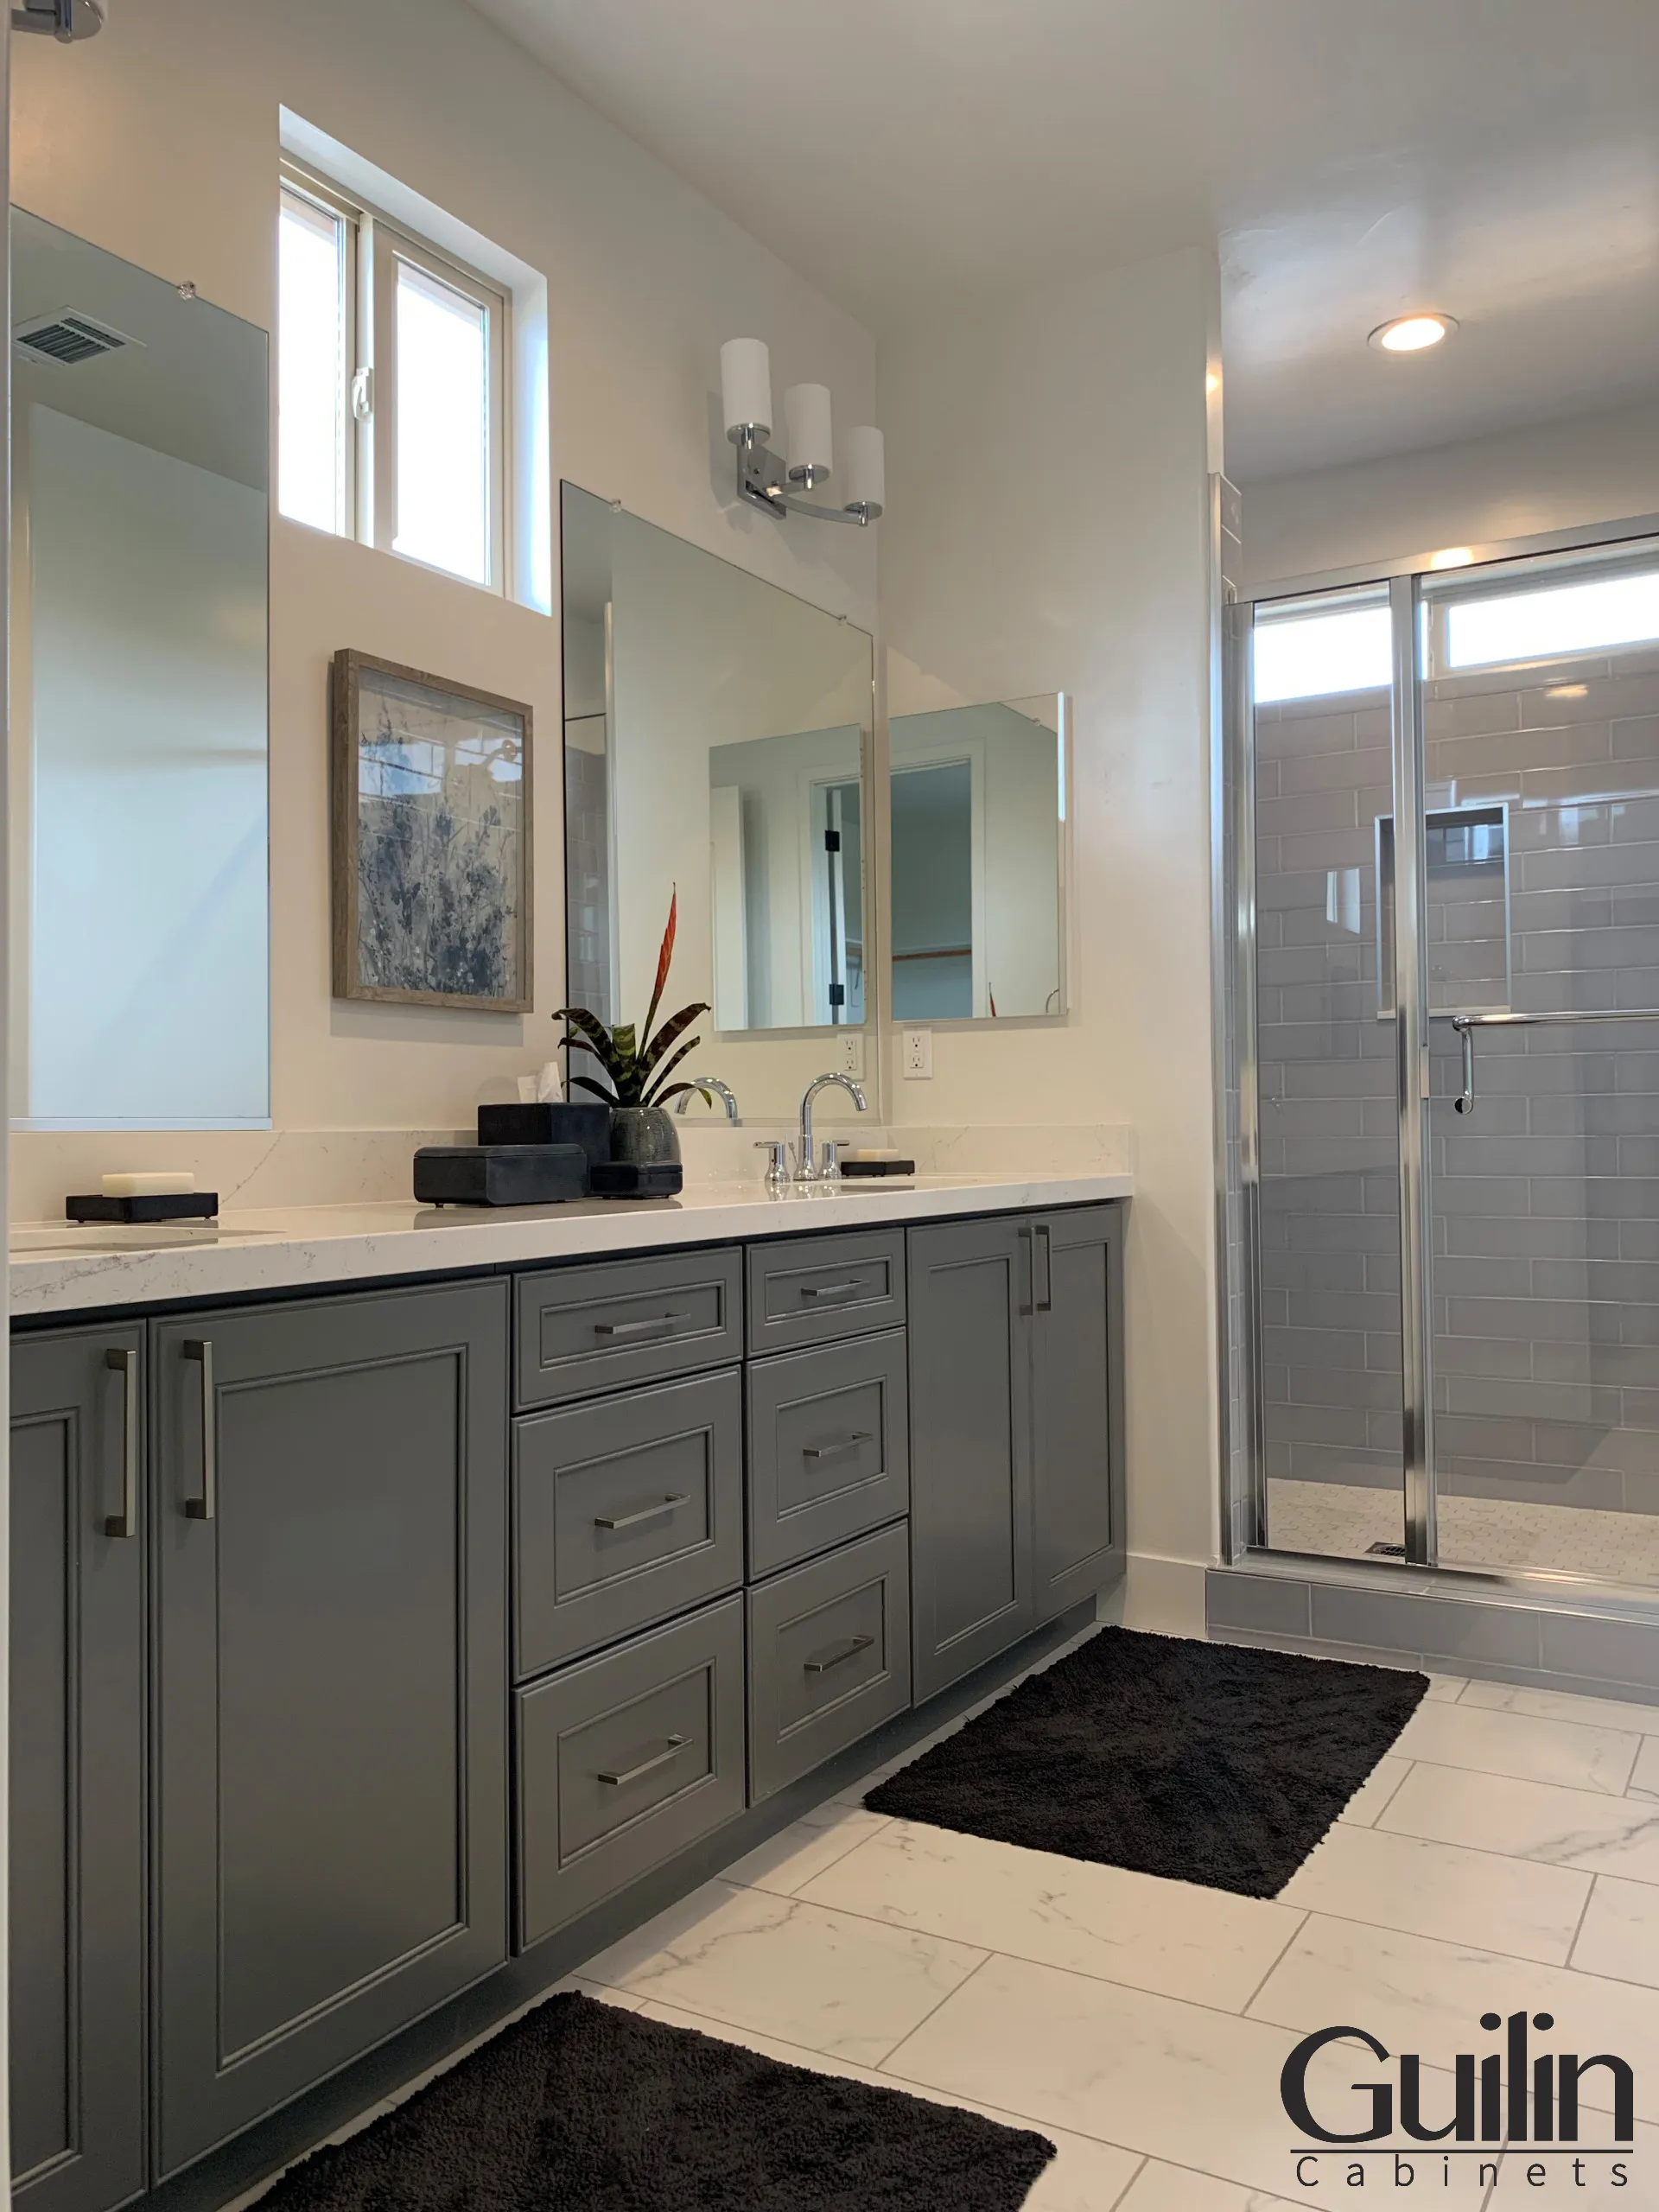 Bathroom remodeling is another way to add great value, luxury, comfort, and functionality to your home.